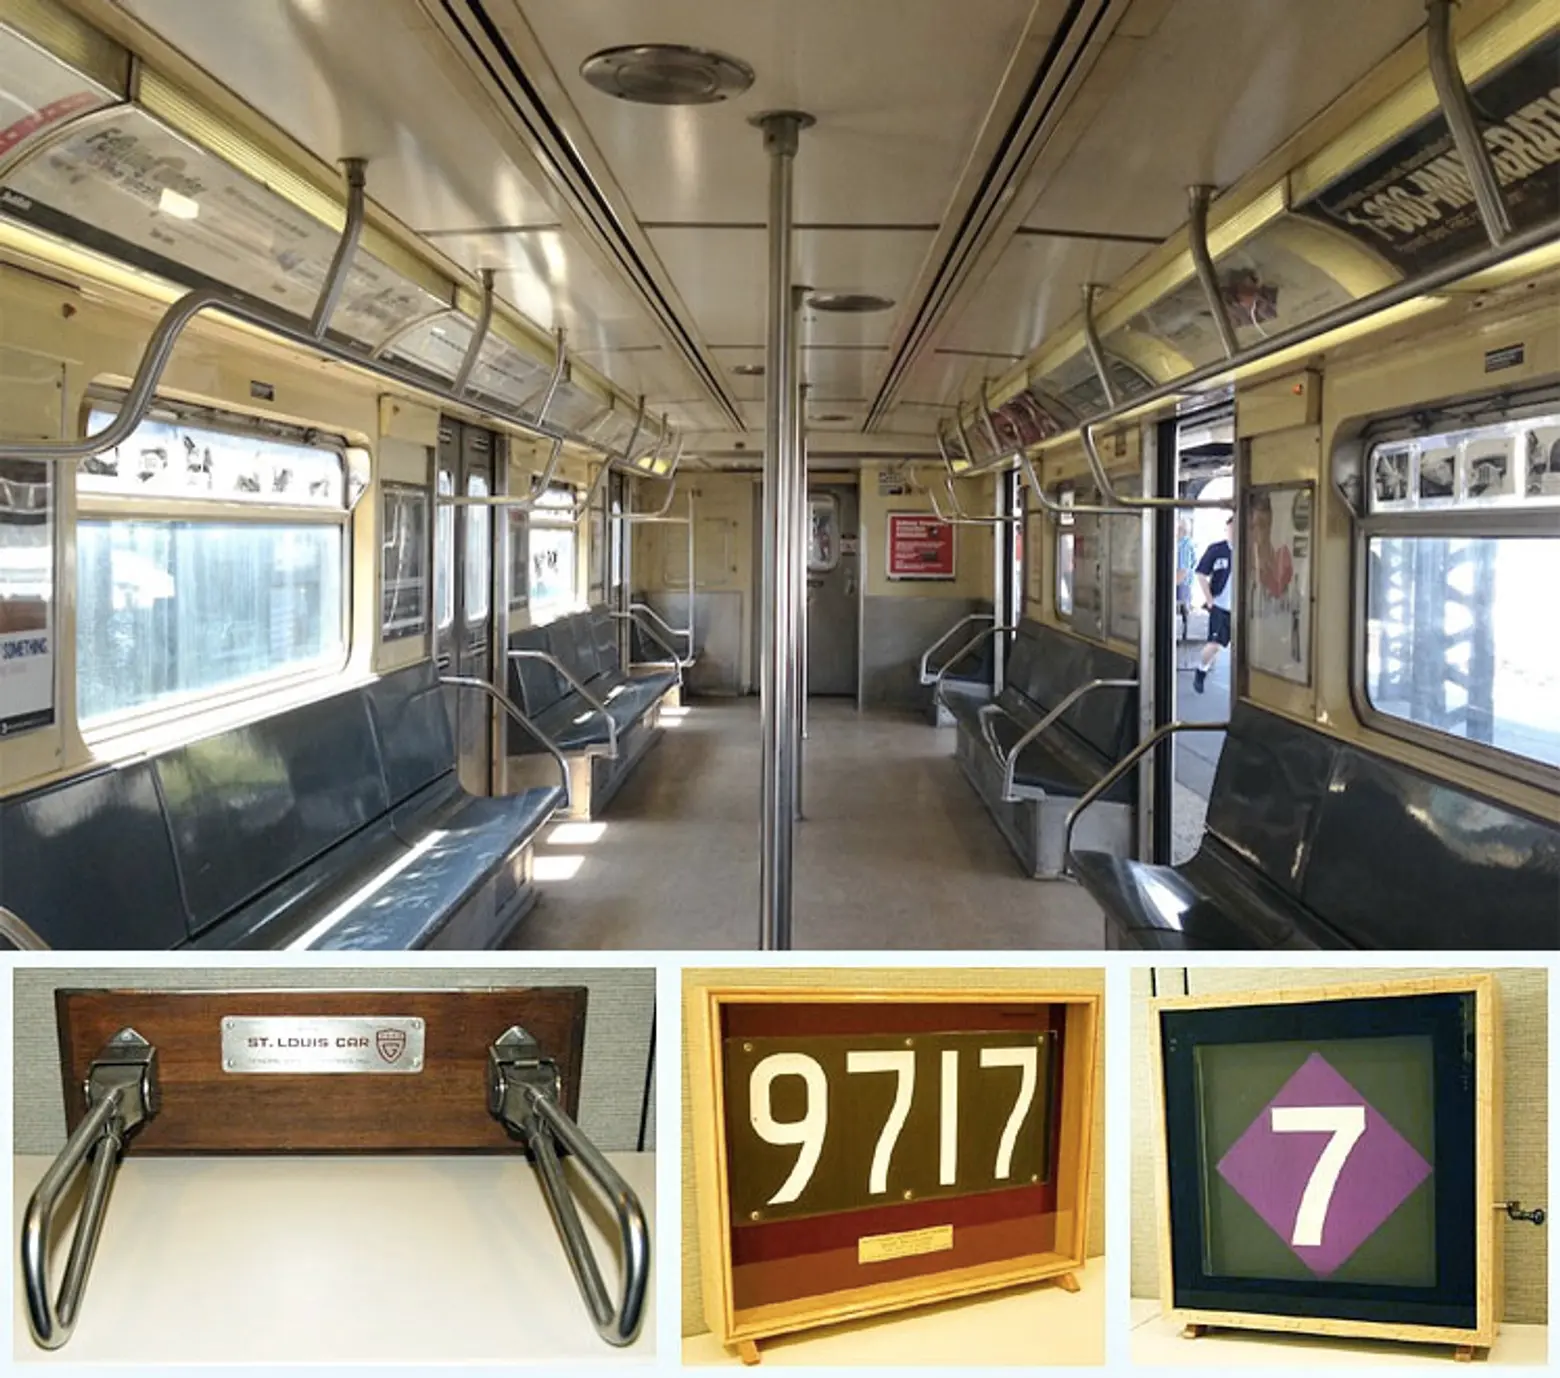 Buy Old Subway Seats, Signs, Tokens and More From the MTA